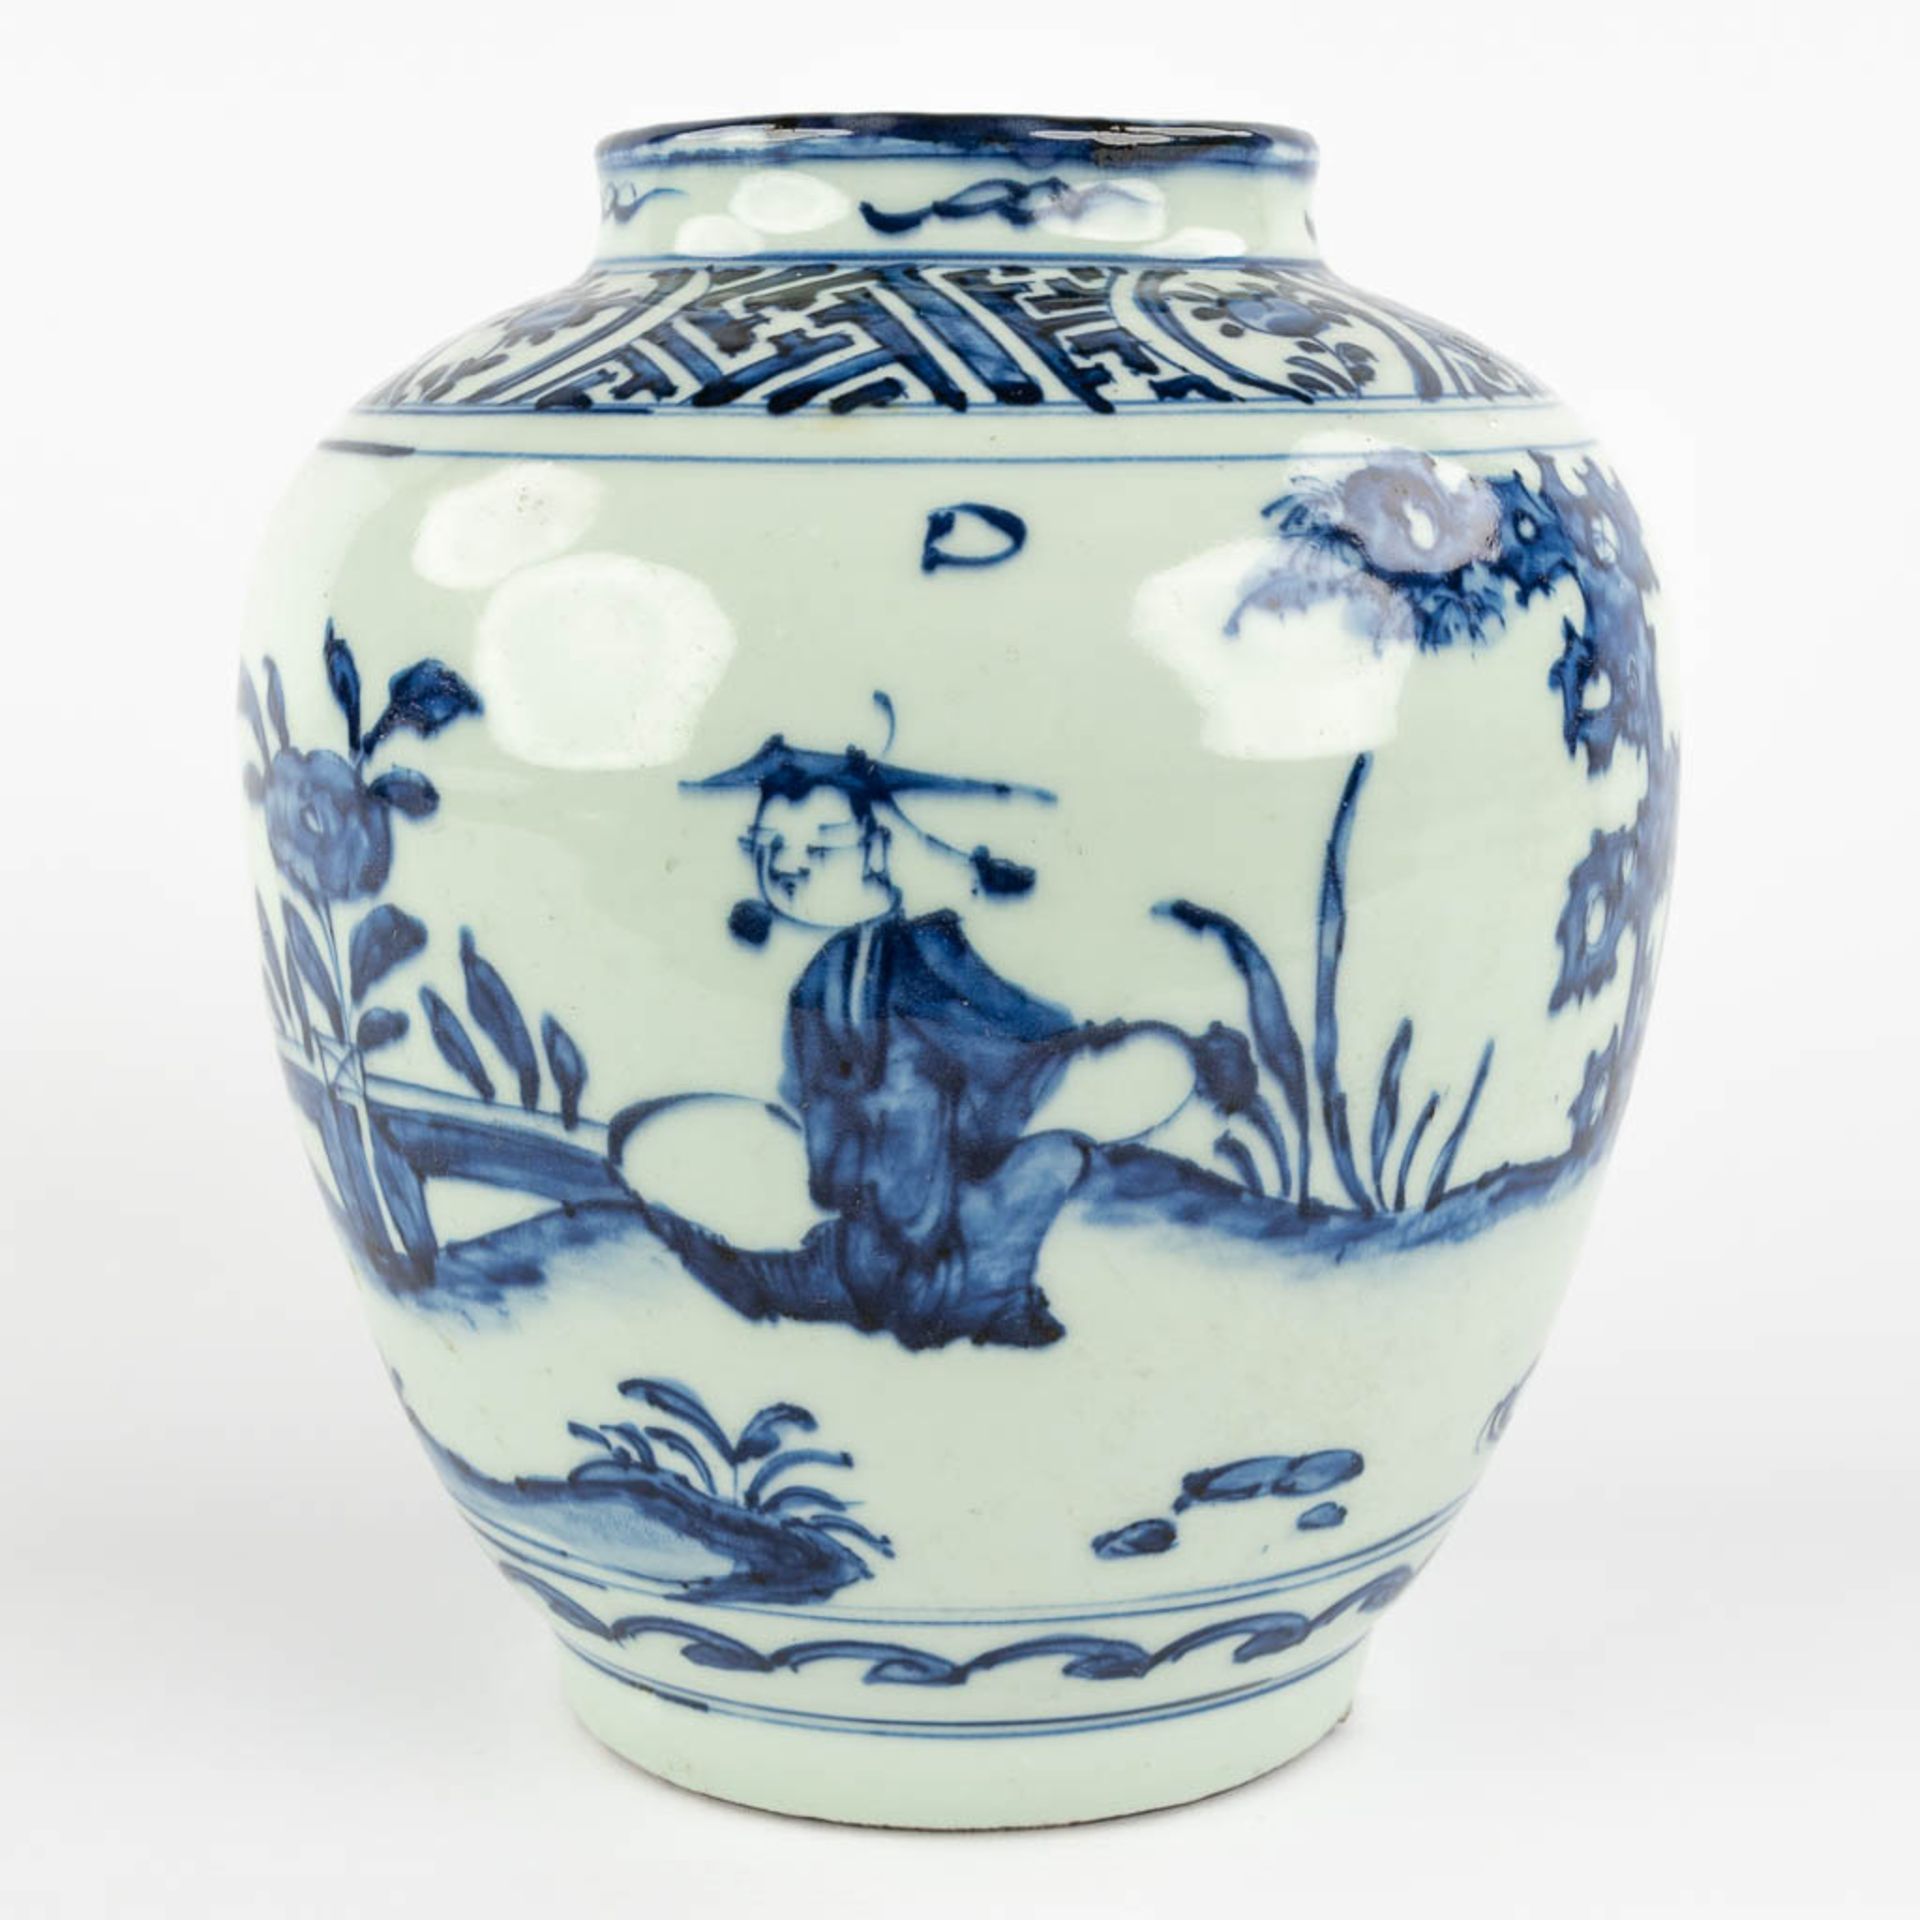 A Chinese pot with blue-white decor of a landscape with figurine. Possibly 17th C. (H:23 x D:20 cm)